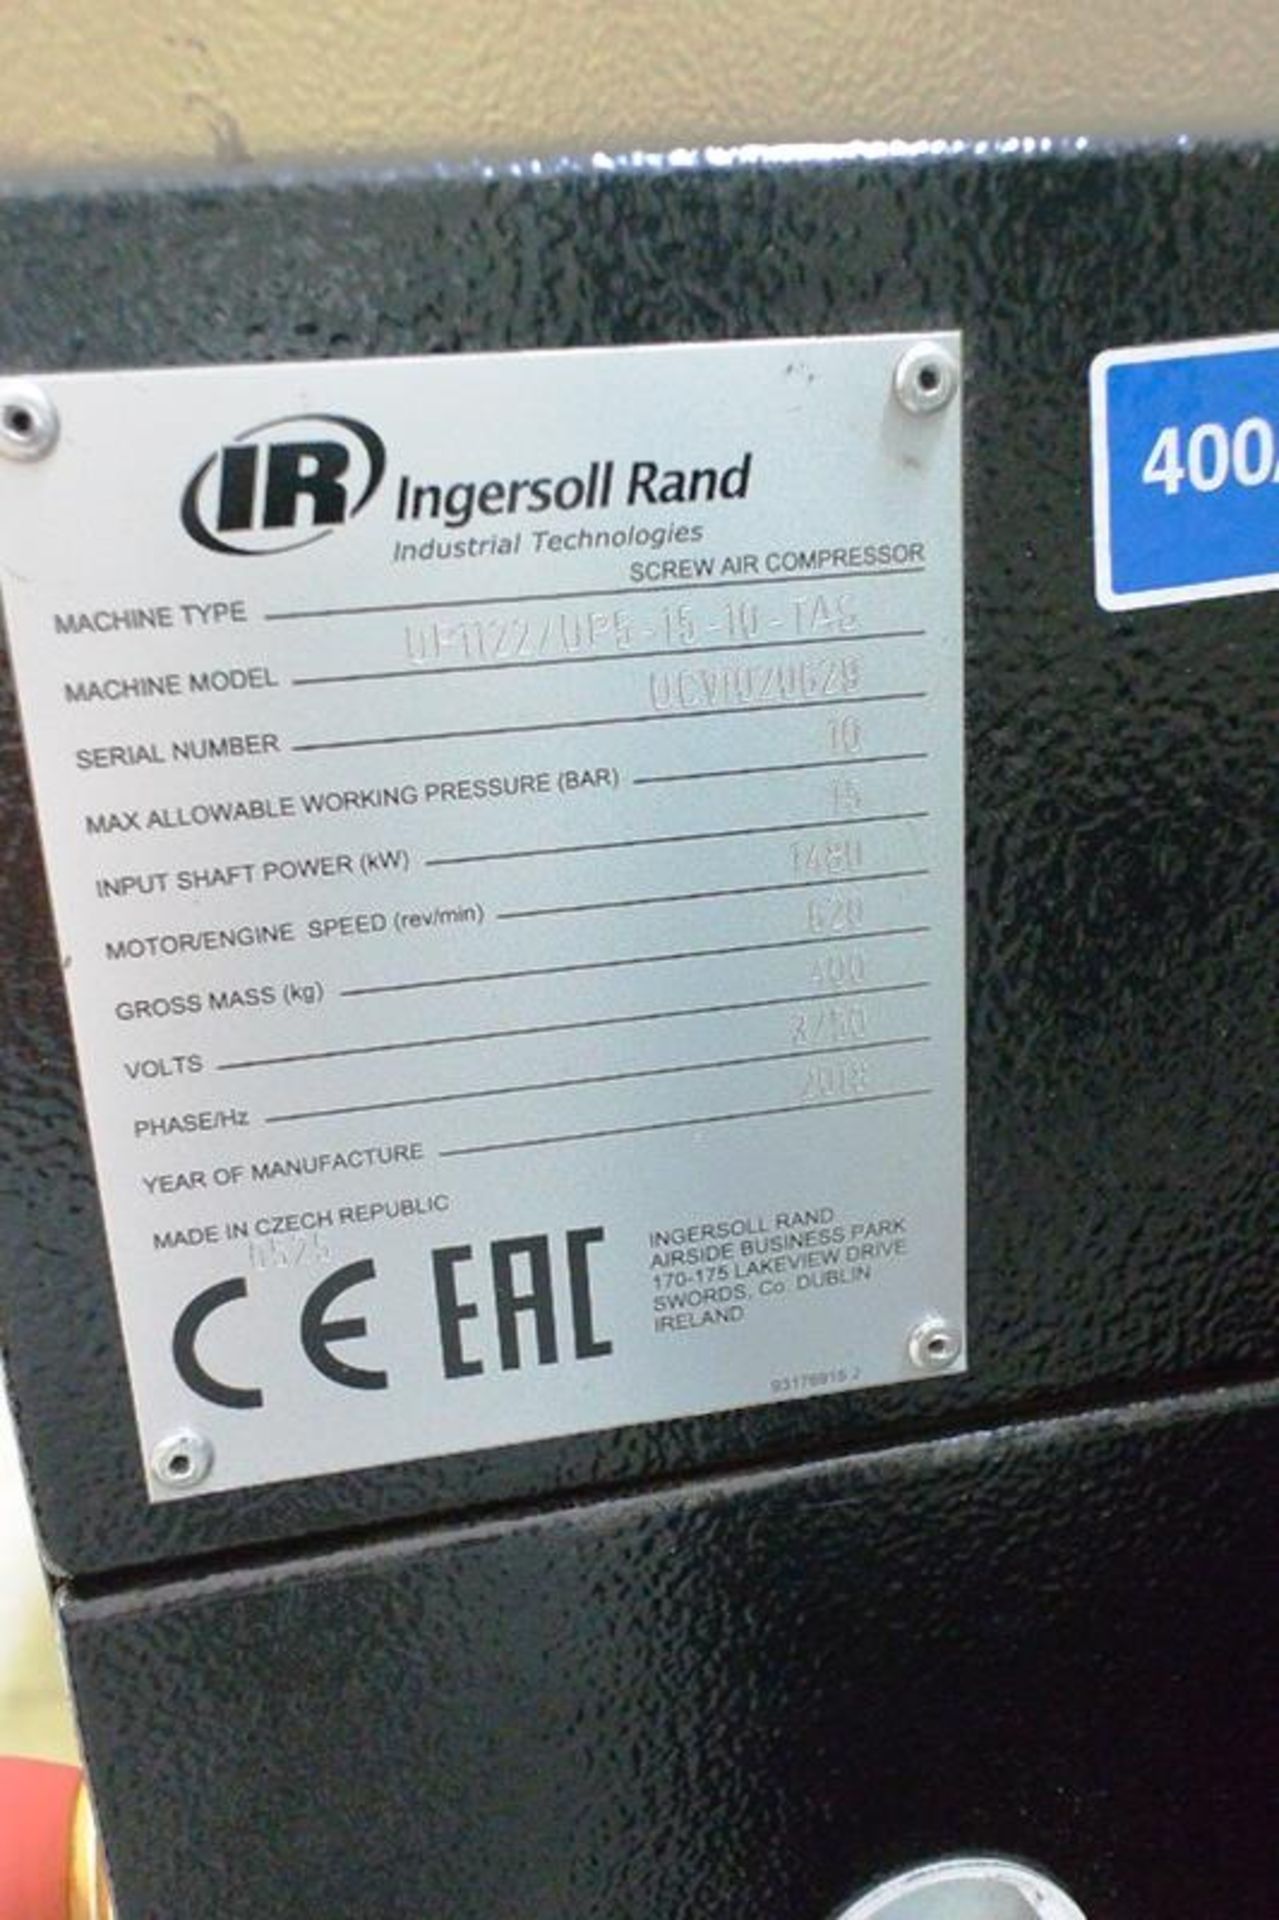 Ingersoll Rand UP1122/UP5-15-10-TAS packaged air compressor (2018) - Image 4 of 7